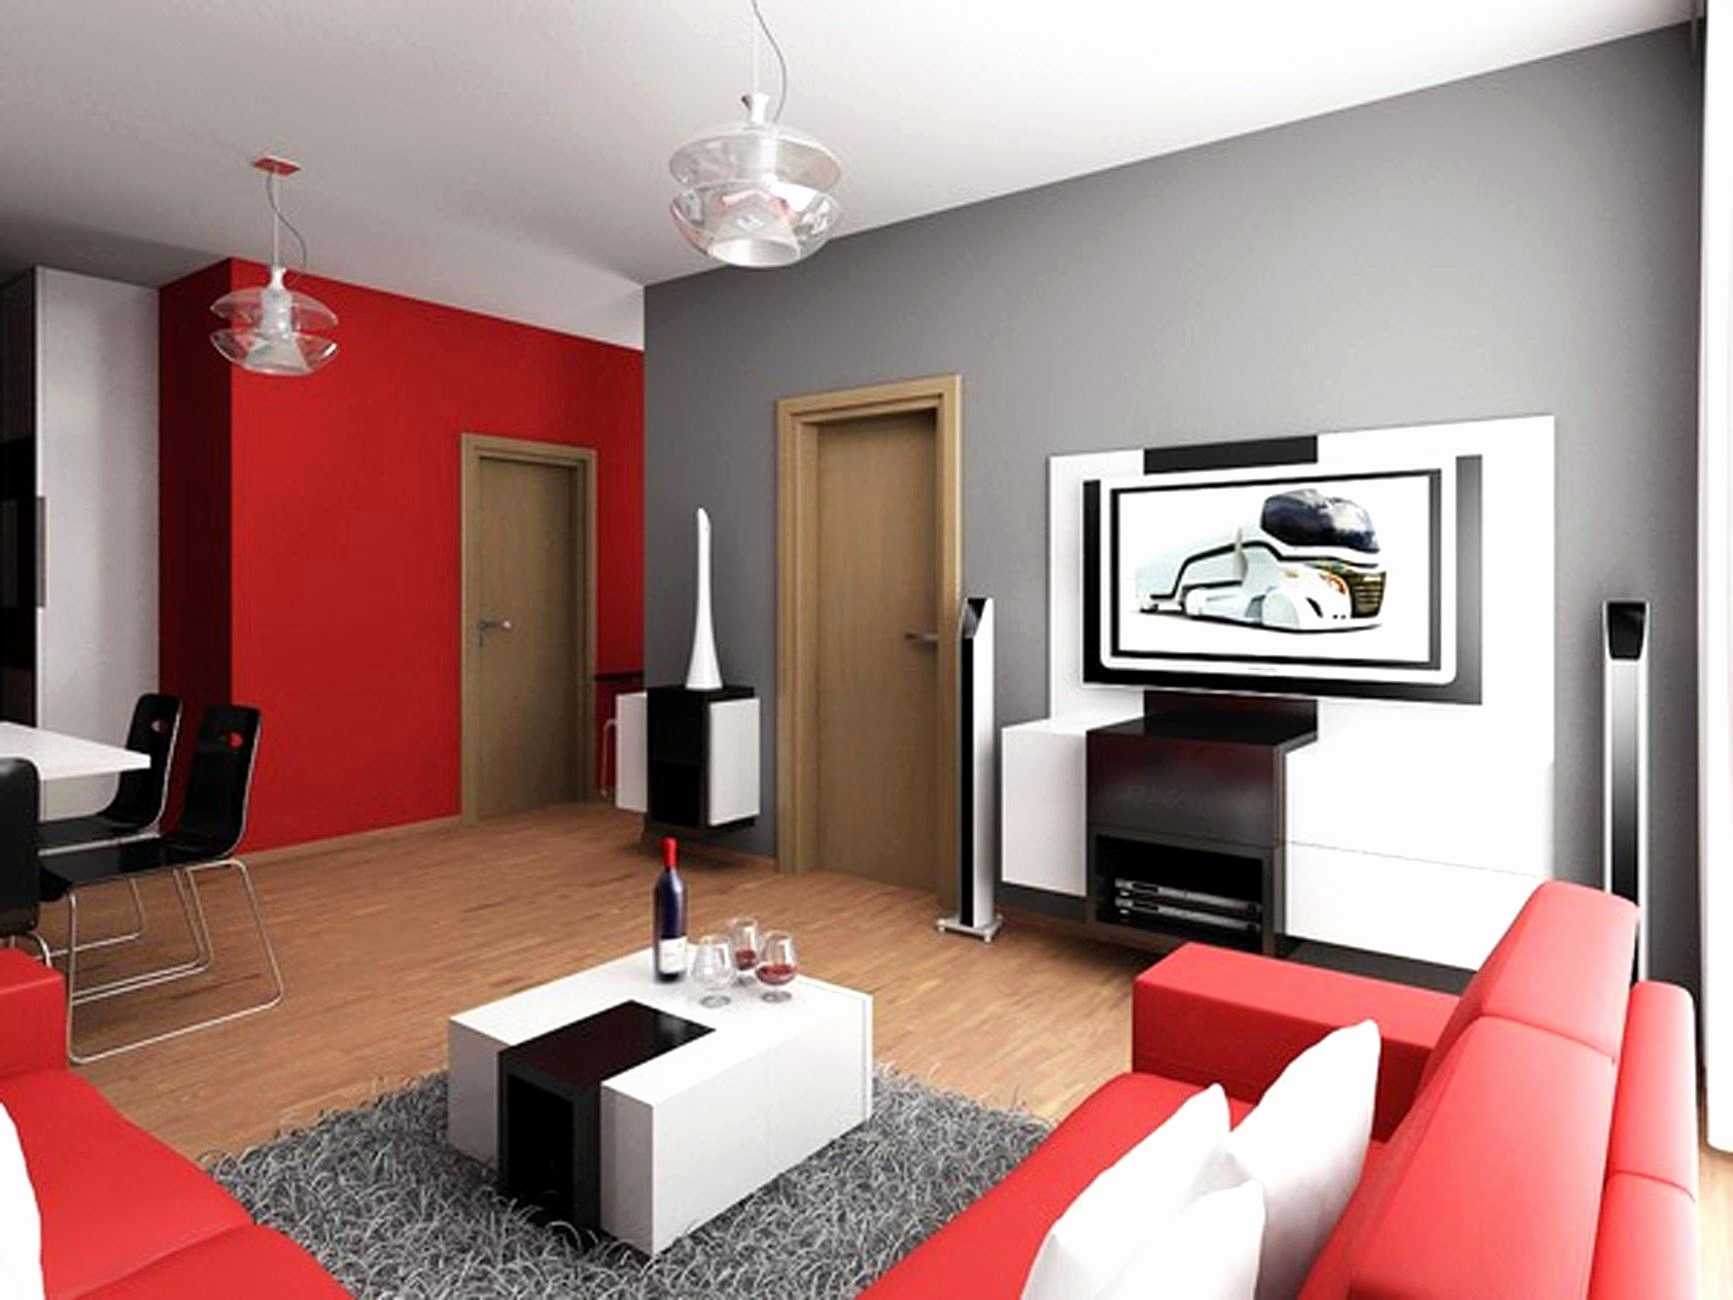 Minimalistic red couch living room style